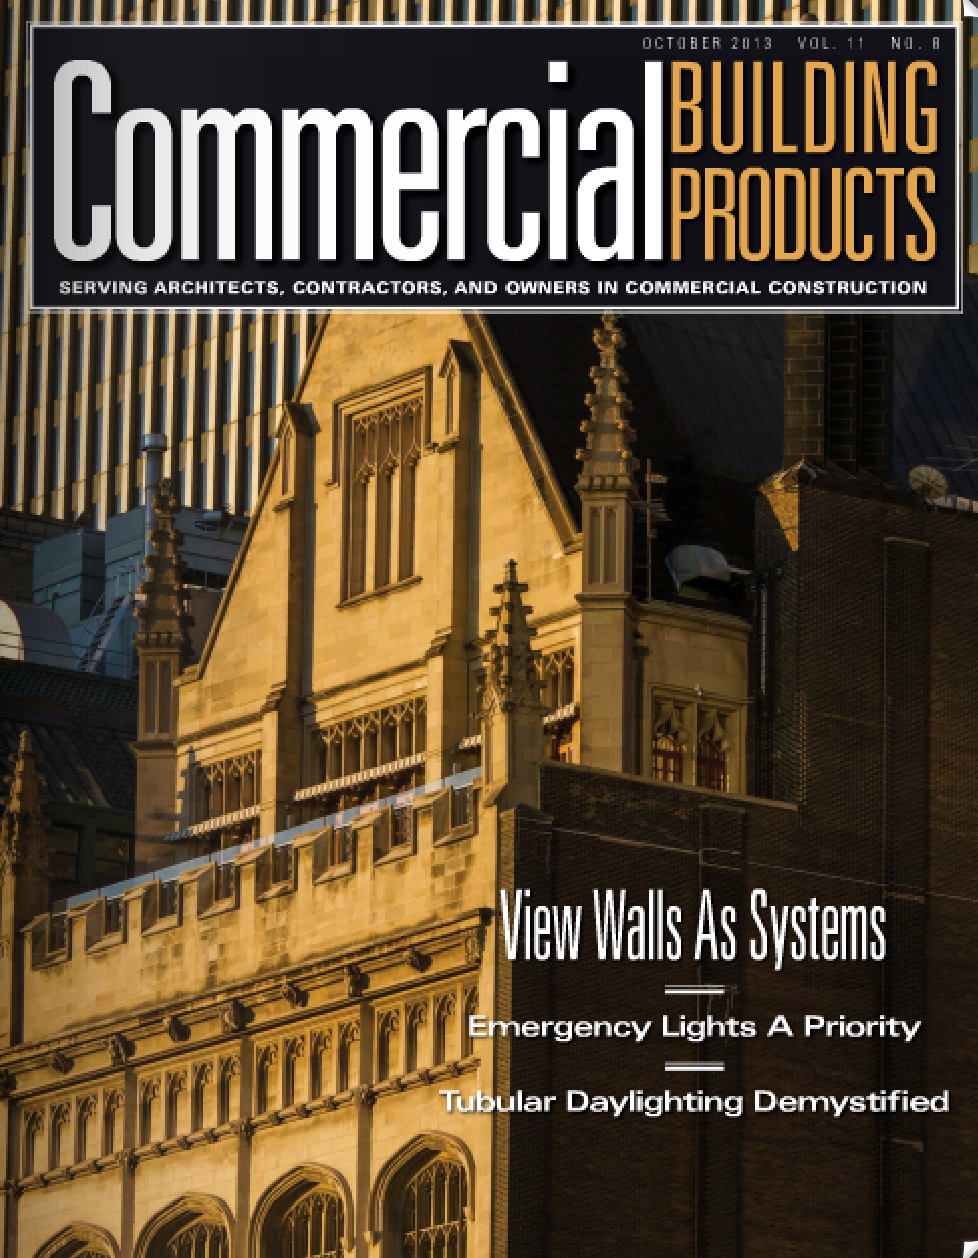 Commercial Building Products Magazine, October issue